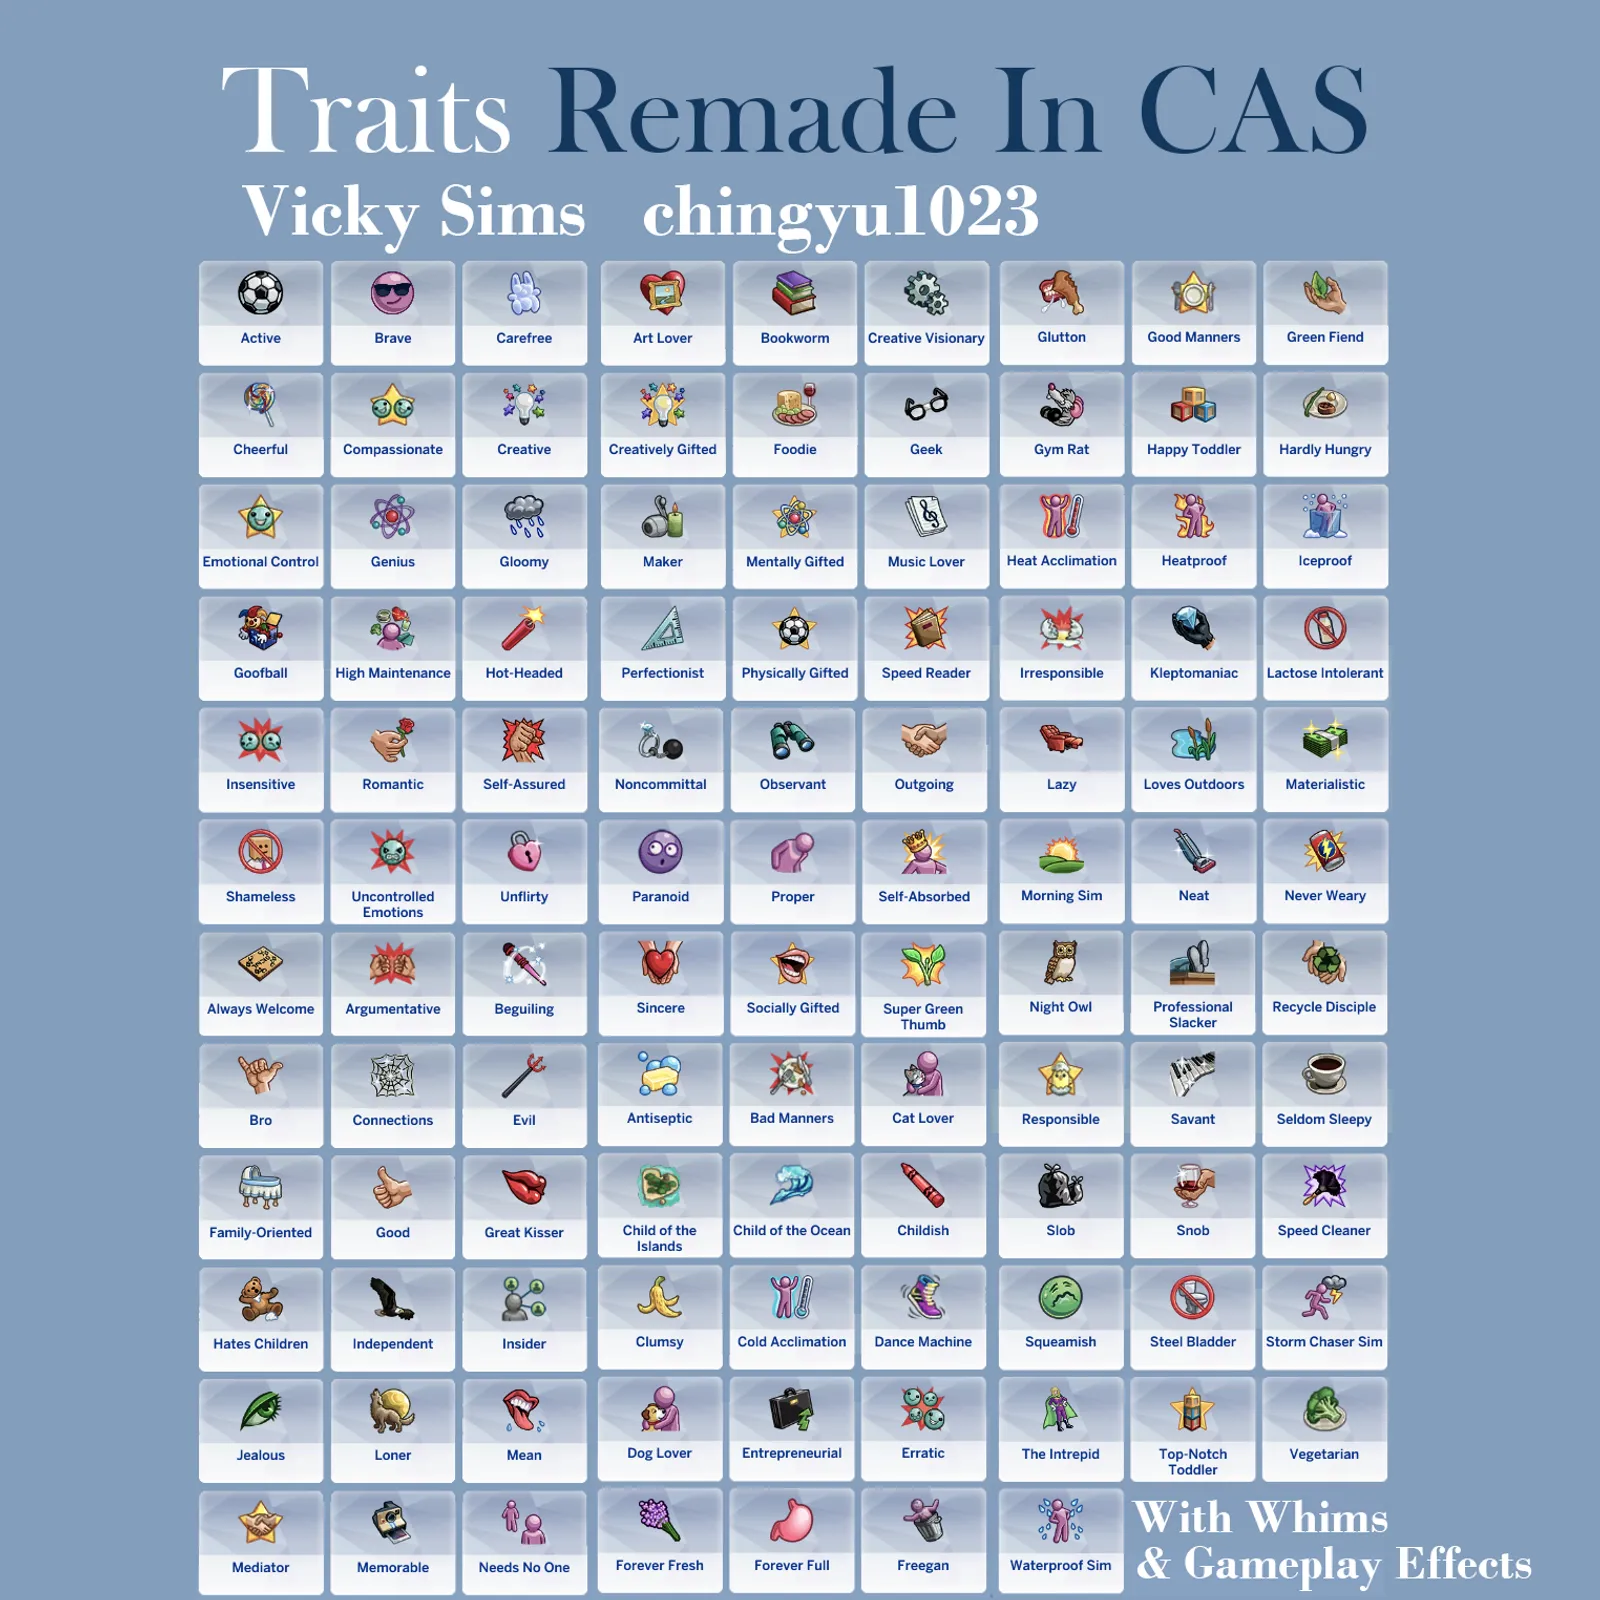 Traits Remade In CAS v1.4